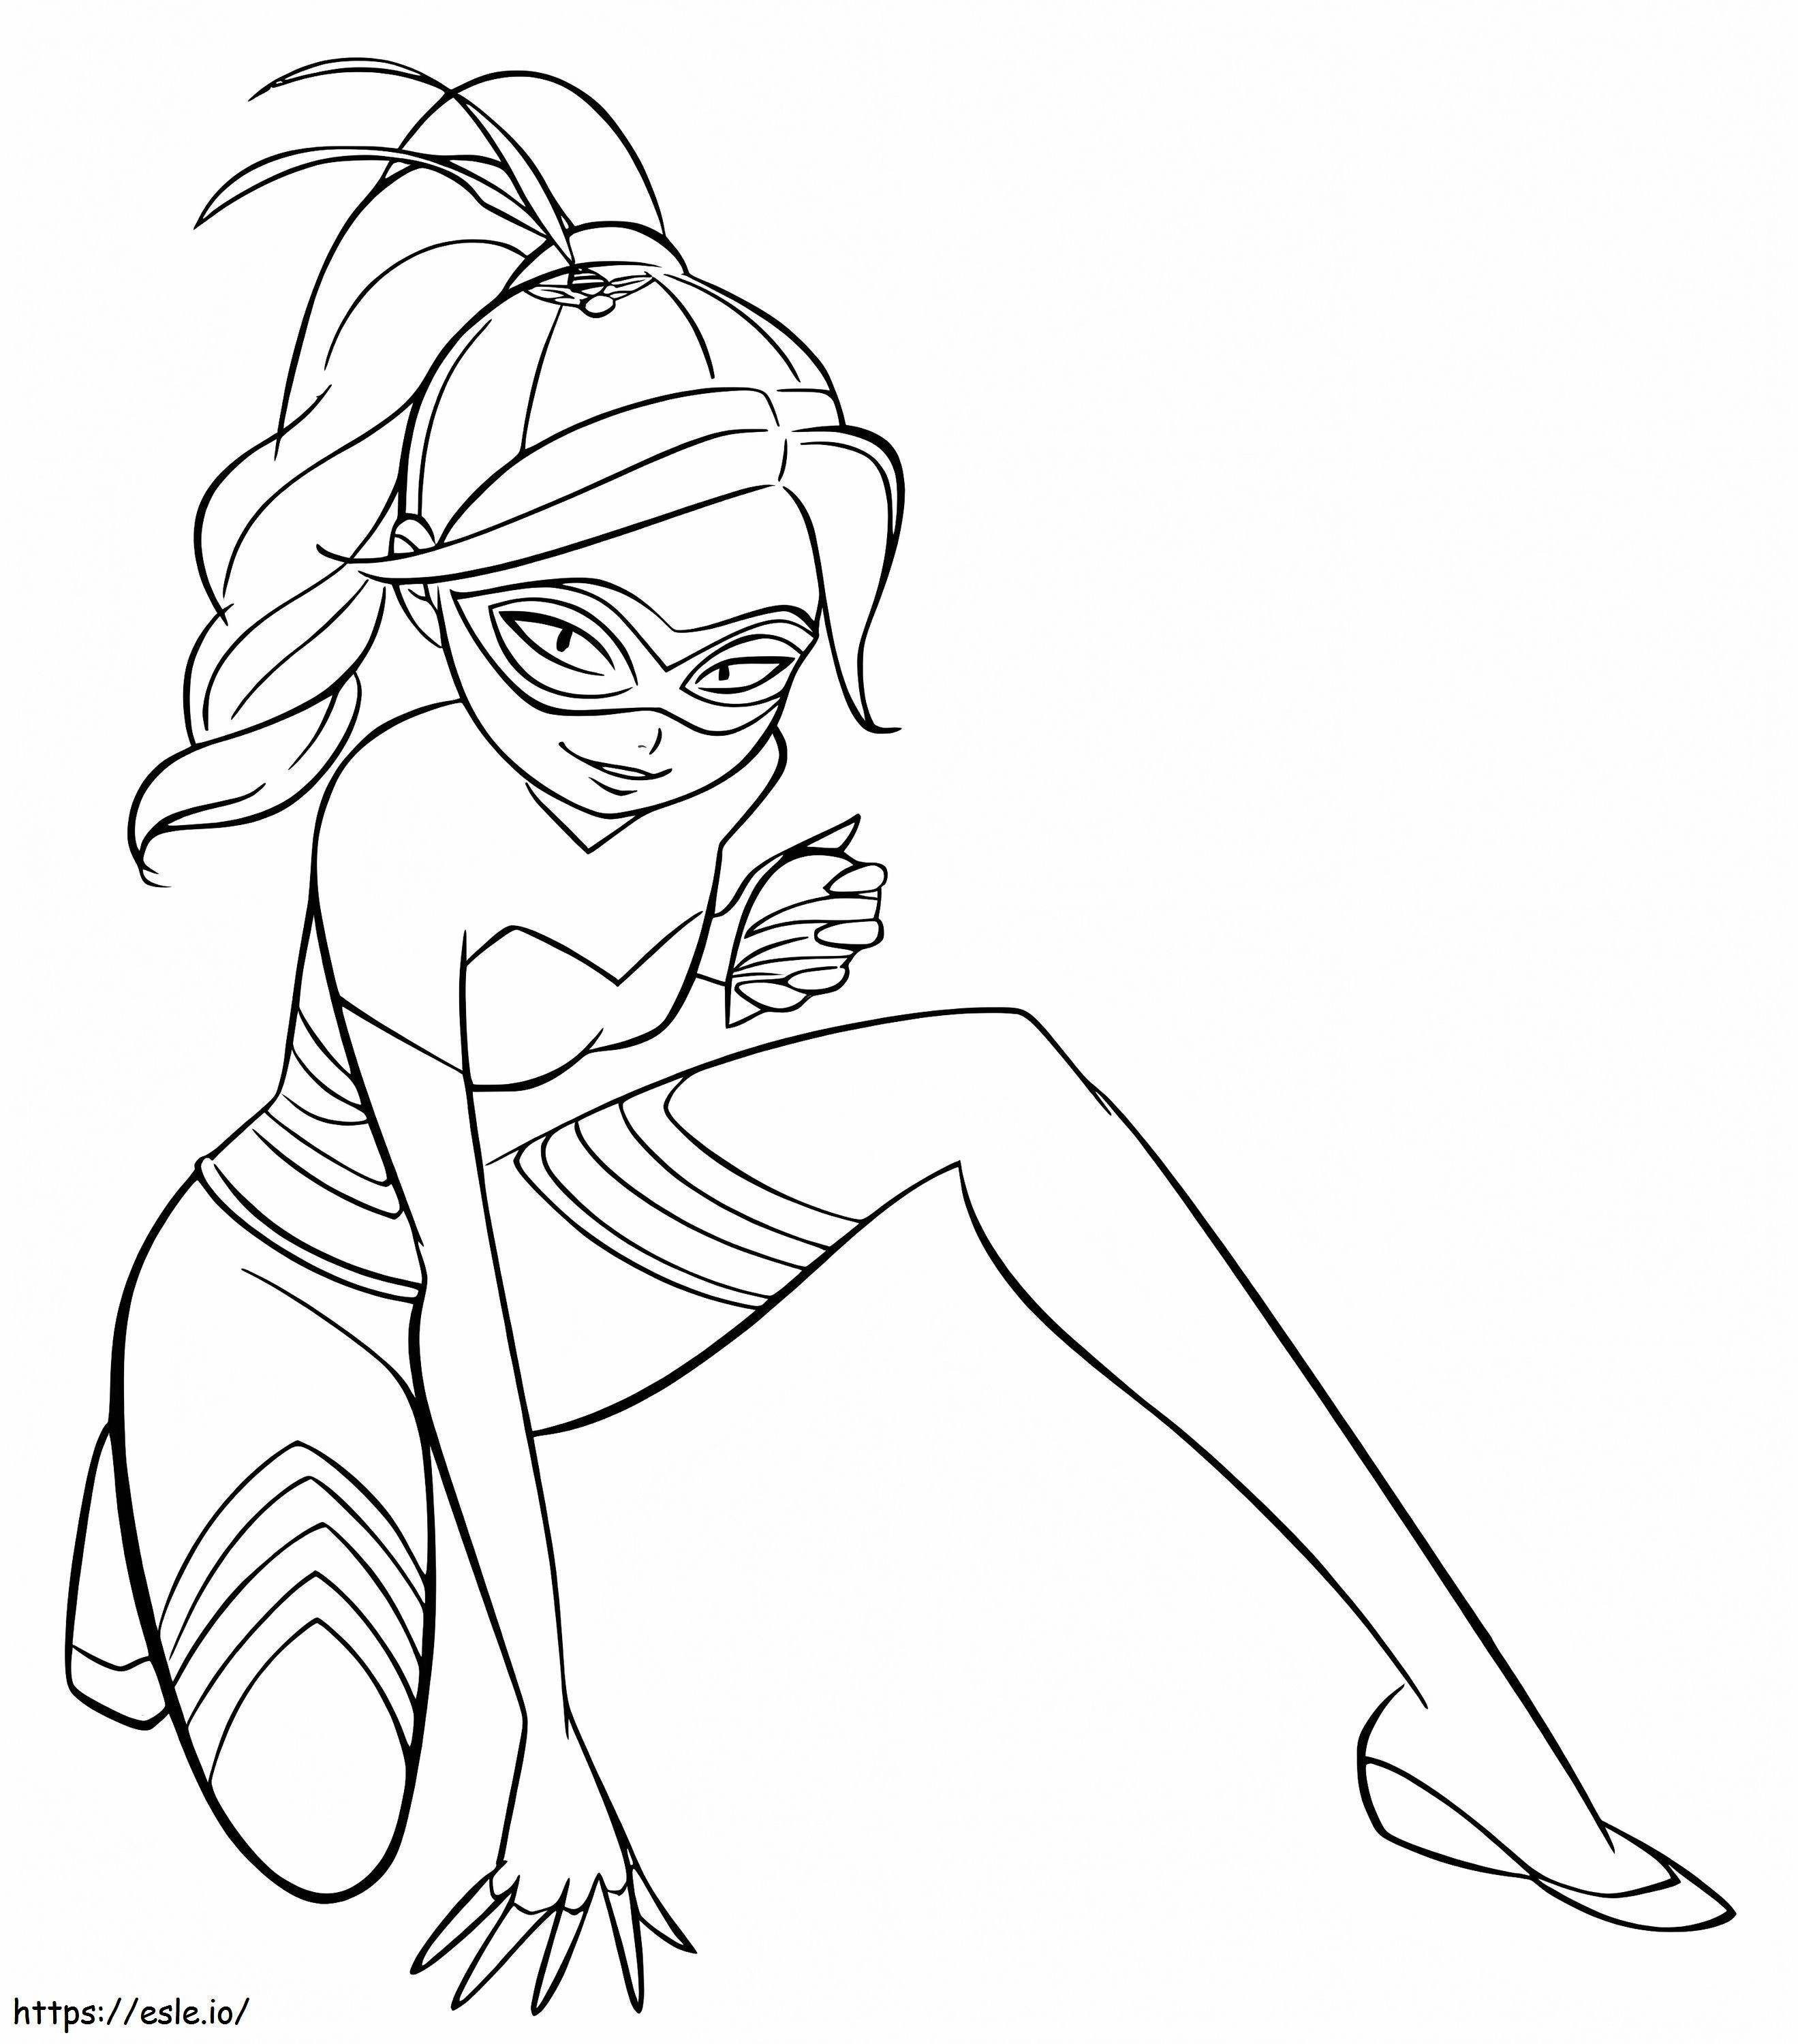 Rena rouge from miraculous coloring page